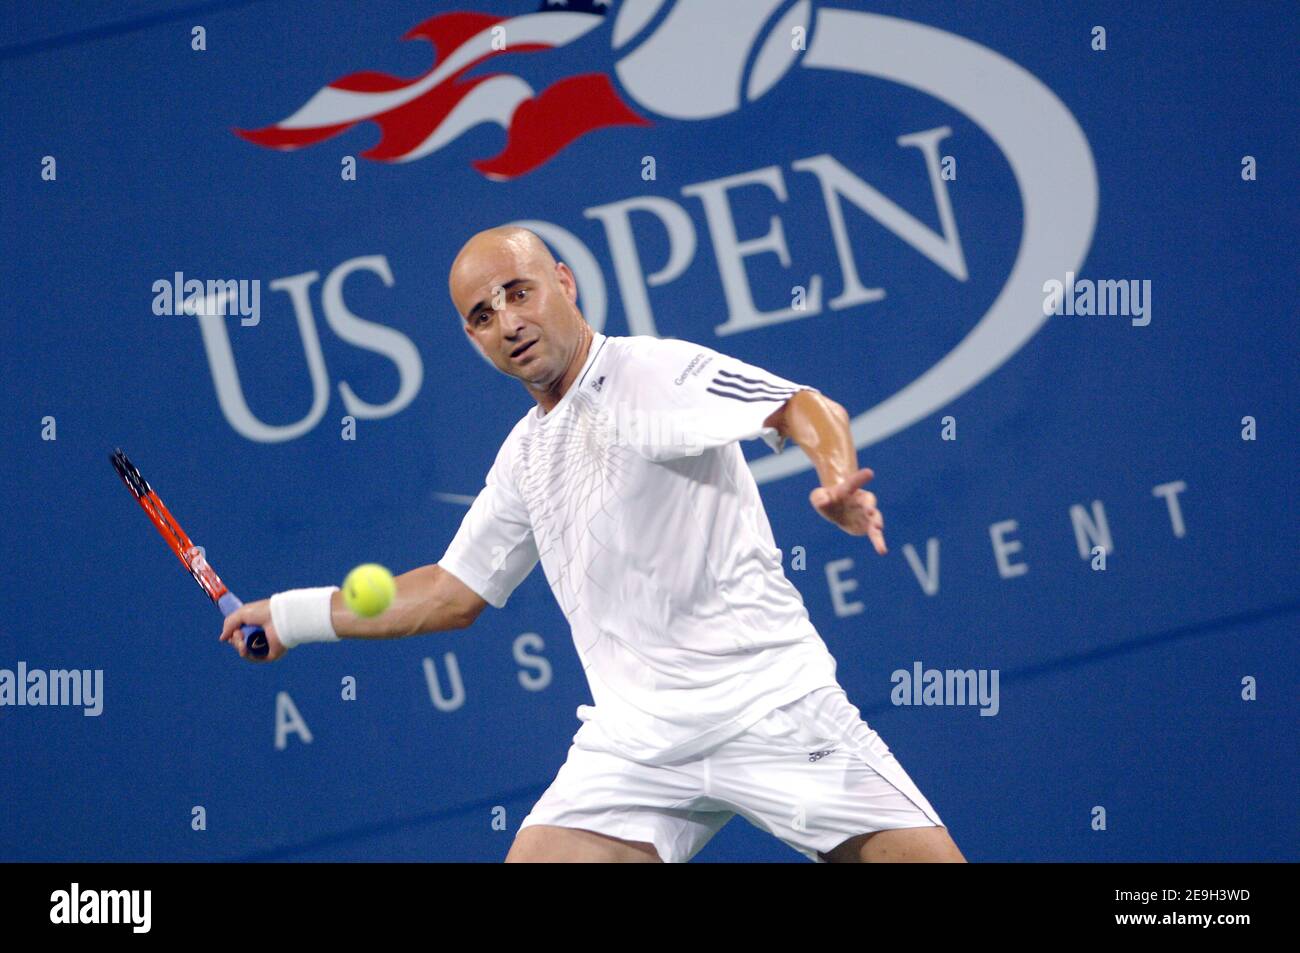 Andre Agassi defeats Marcos Baghdatis at the 2006 US Open in New York City,  NY, USA, on August 31, 2006. Photo by Lionel Hahn/CAMELEON/ABACAPRESS.COM  Stock Photo - Alamy